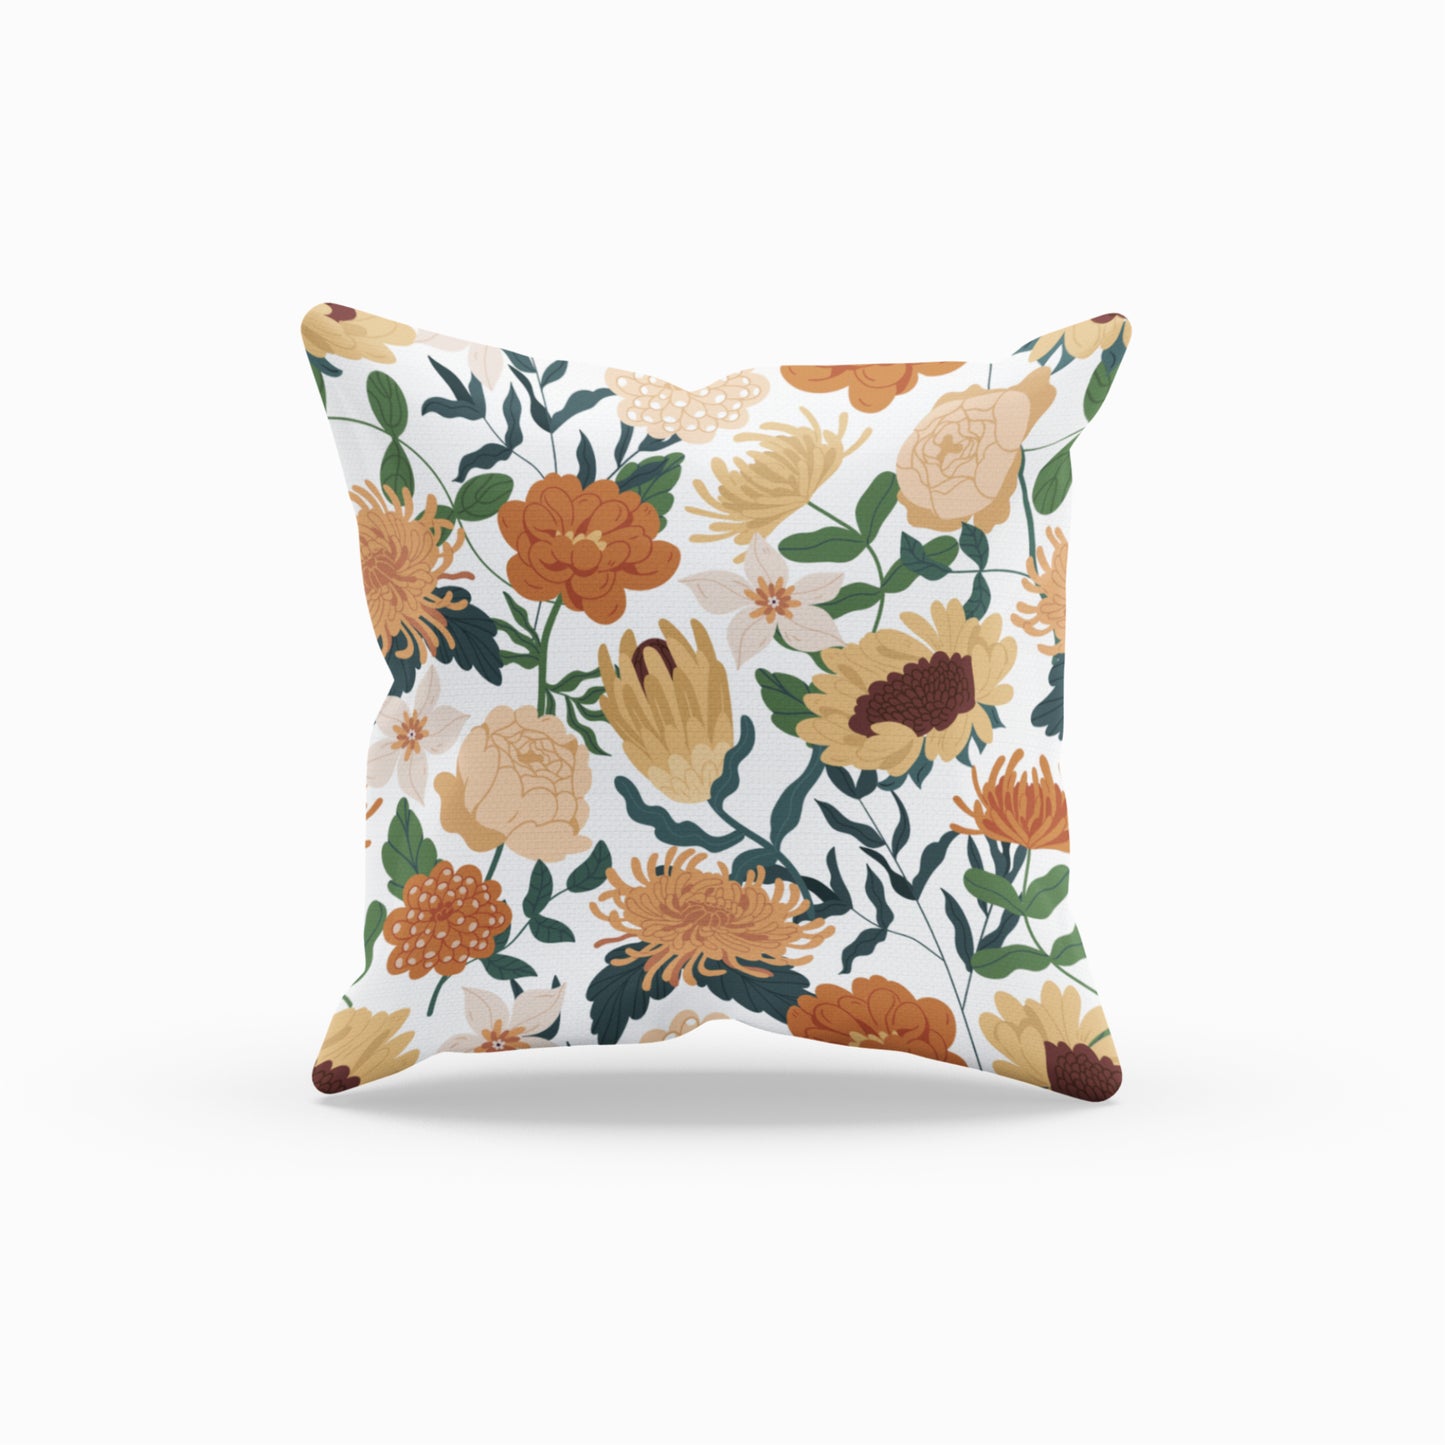 Sunflower Pattern Home Decor Throw Pillow, Living Room Decorative Cushion Covers by Homeezone